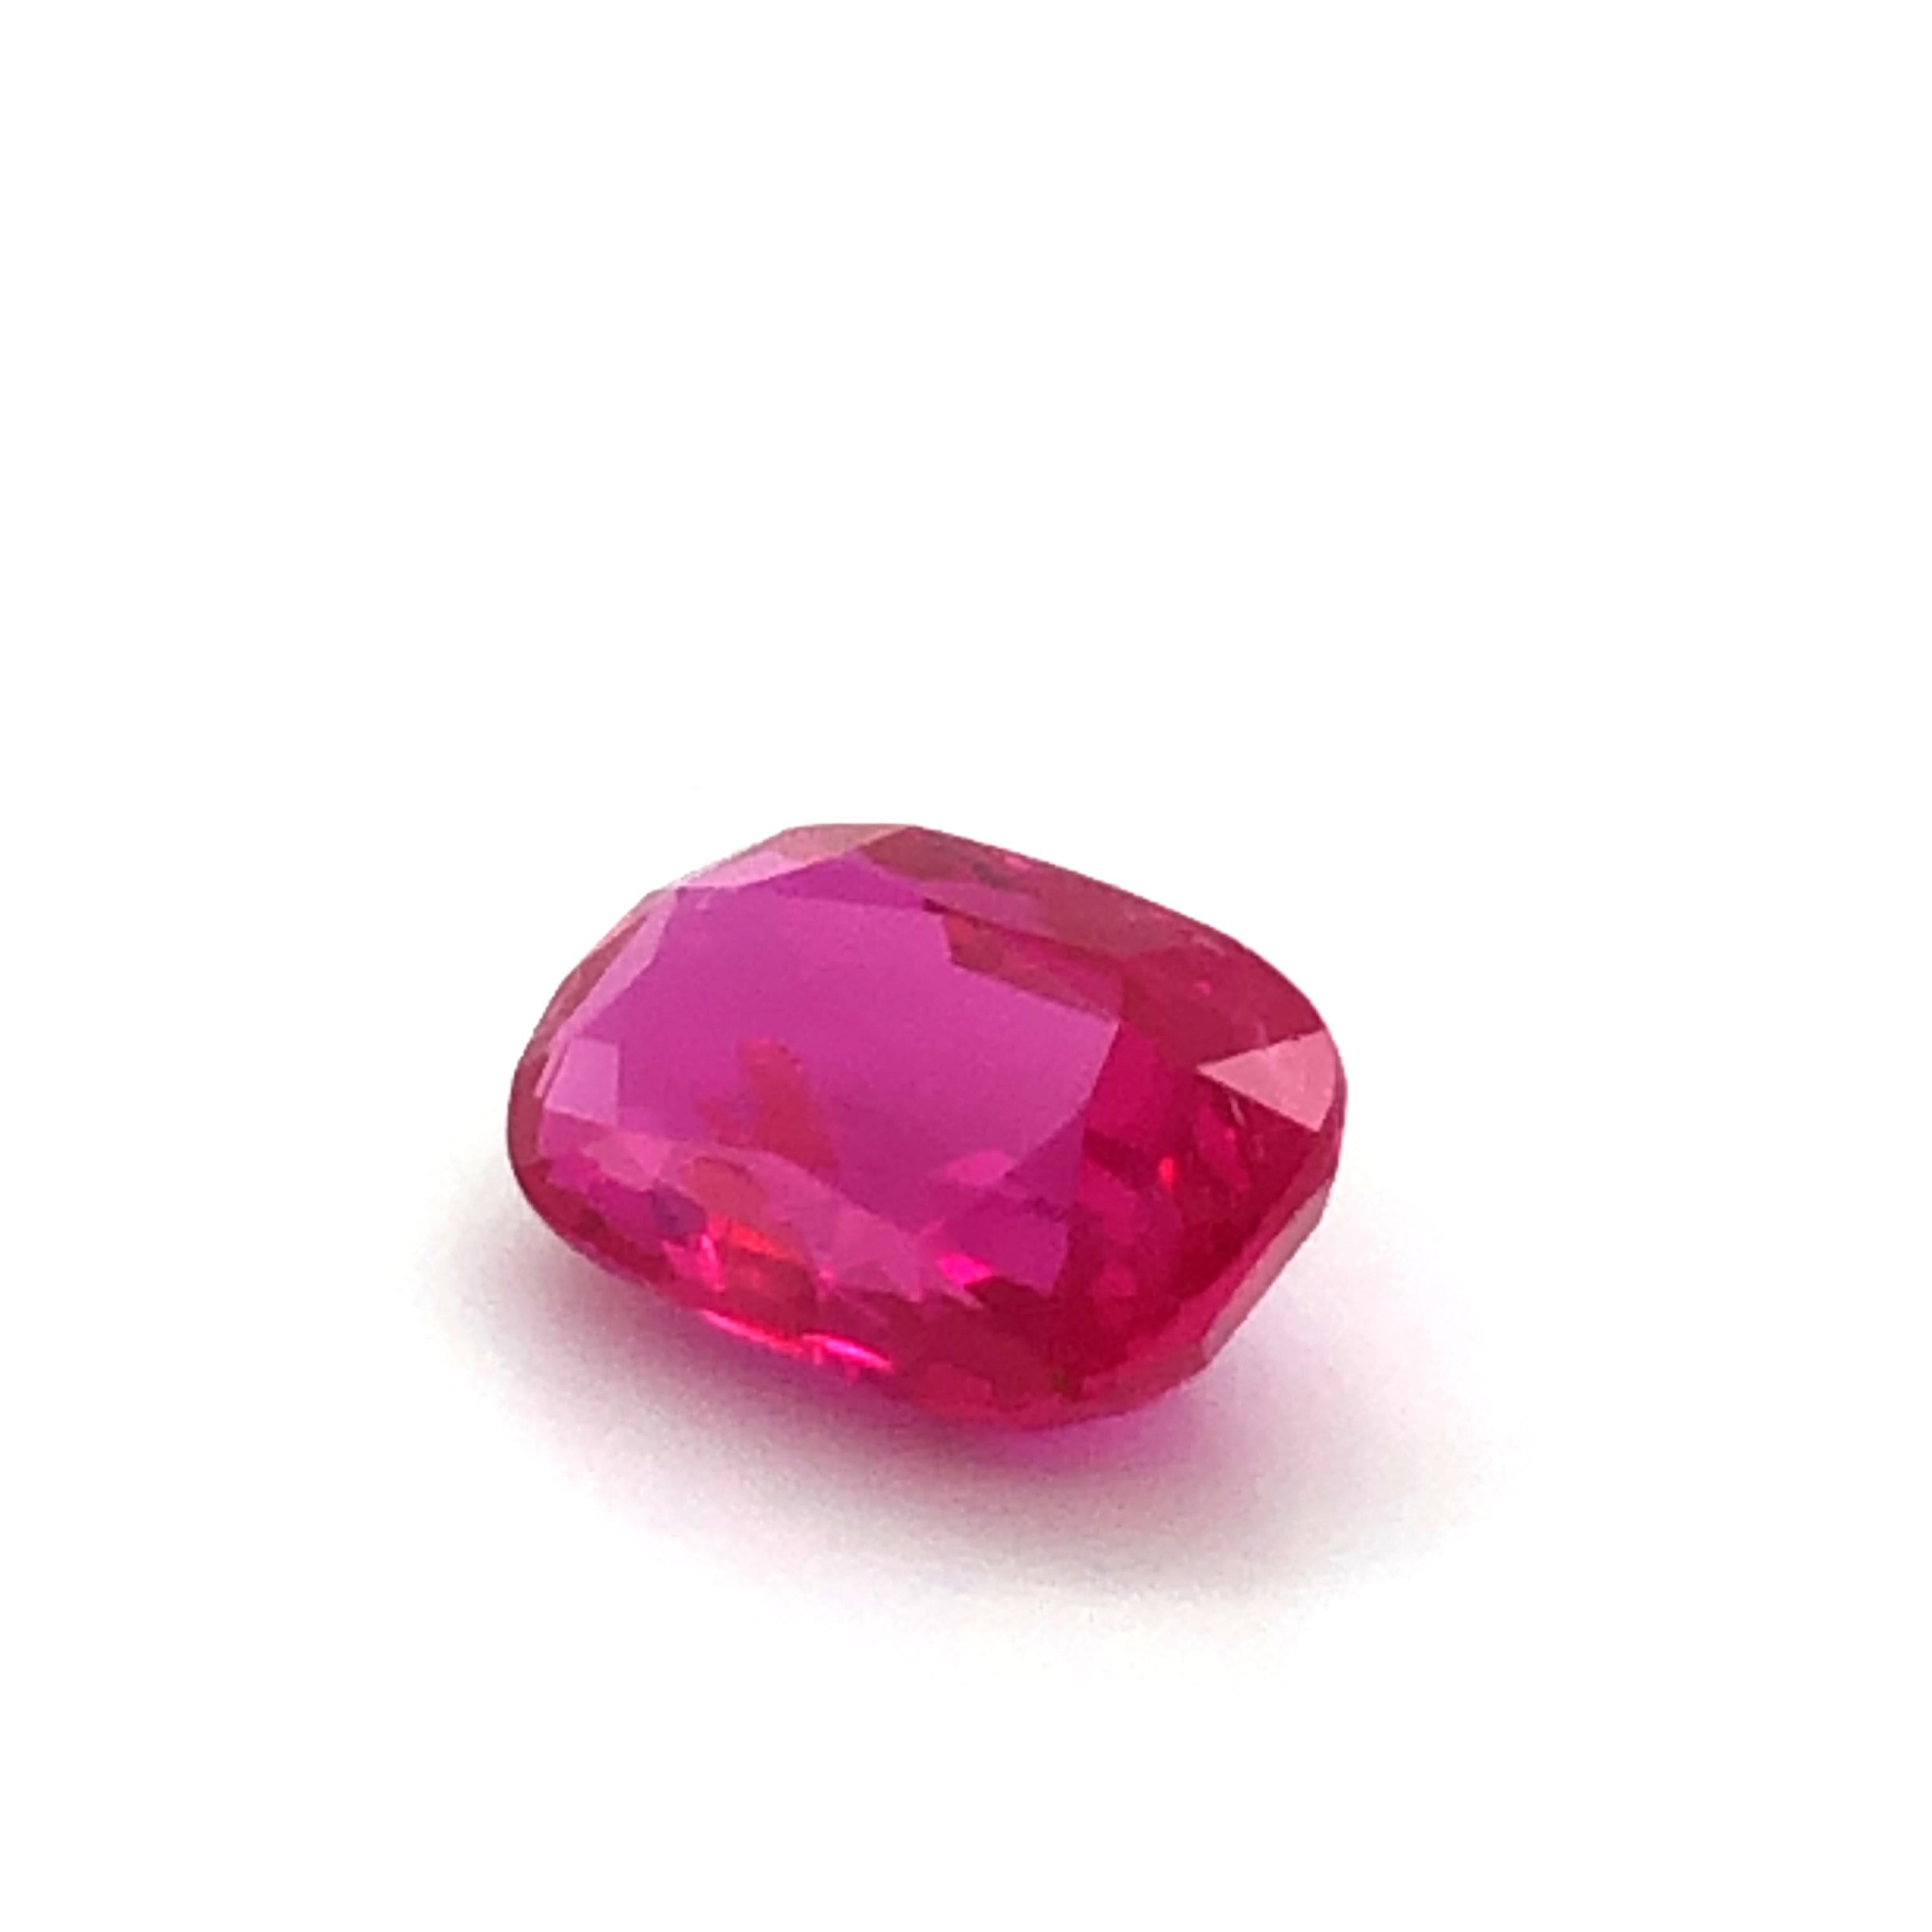 Fine Vietnamese ruby of 4.24 ct. Elegant longish cushion-shape measuring 11.55 x 7.20 x 4.85 mm.

Very fine crystalline material with a vibrant pink-red colour. That’s what we call a happy stone!

Ruby is accompanied by Gübelin Gemmological Report